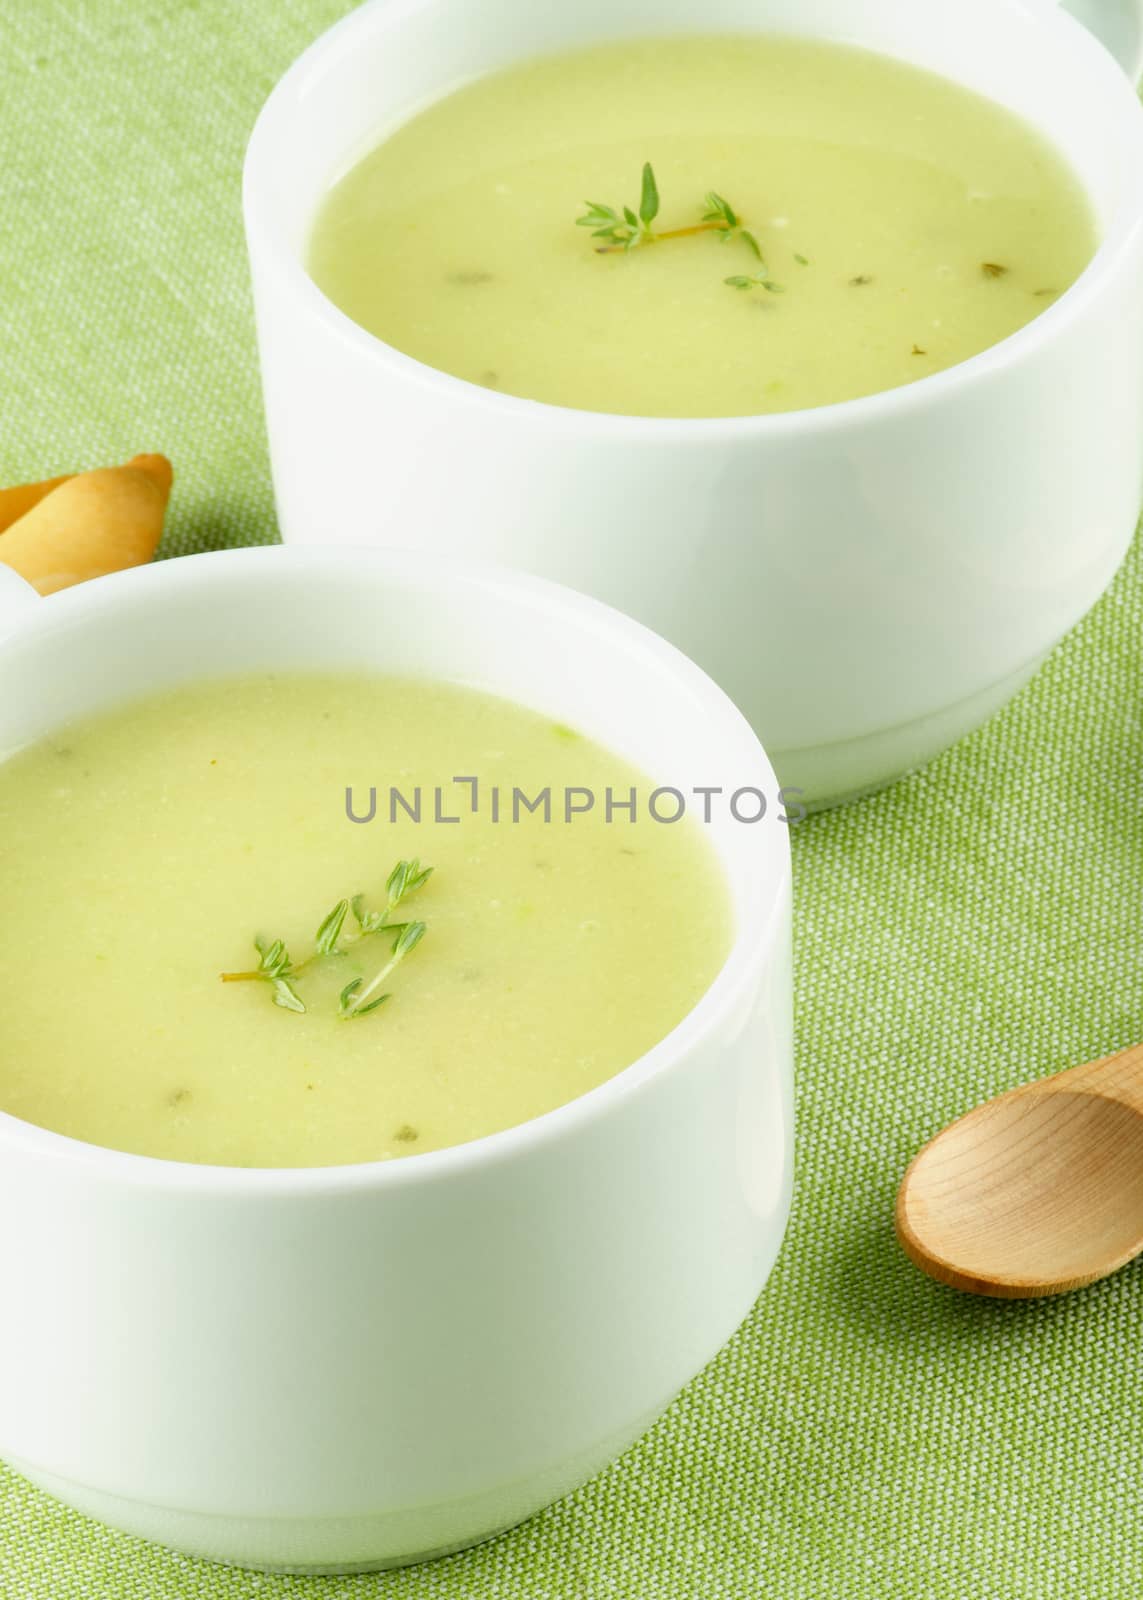 Delicious Cream Asparagus Soup in Two White Soup Cups Cross Section on Green Napkin